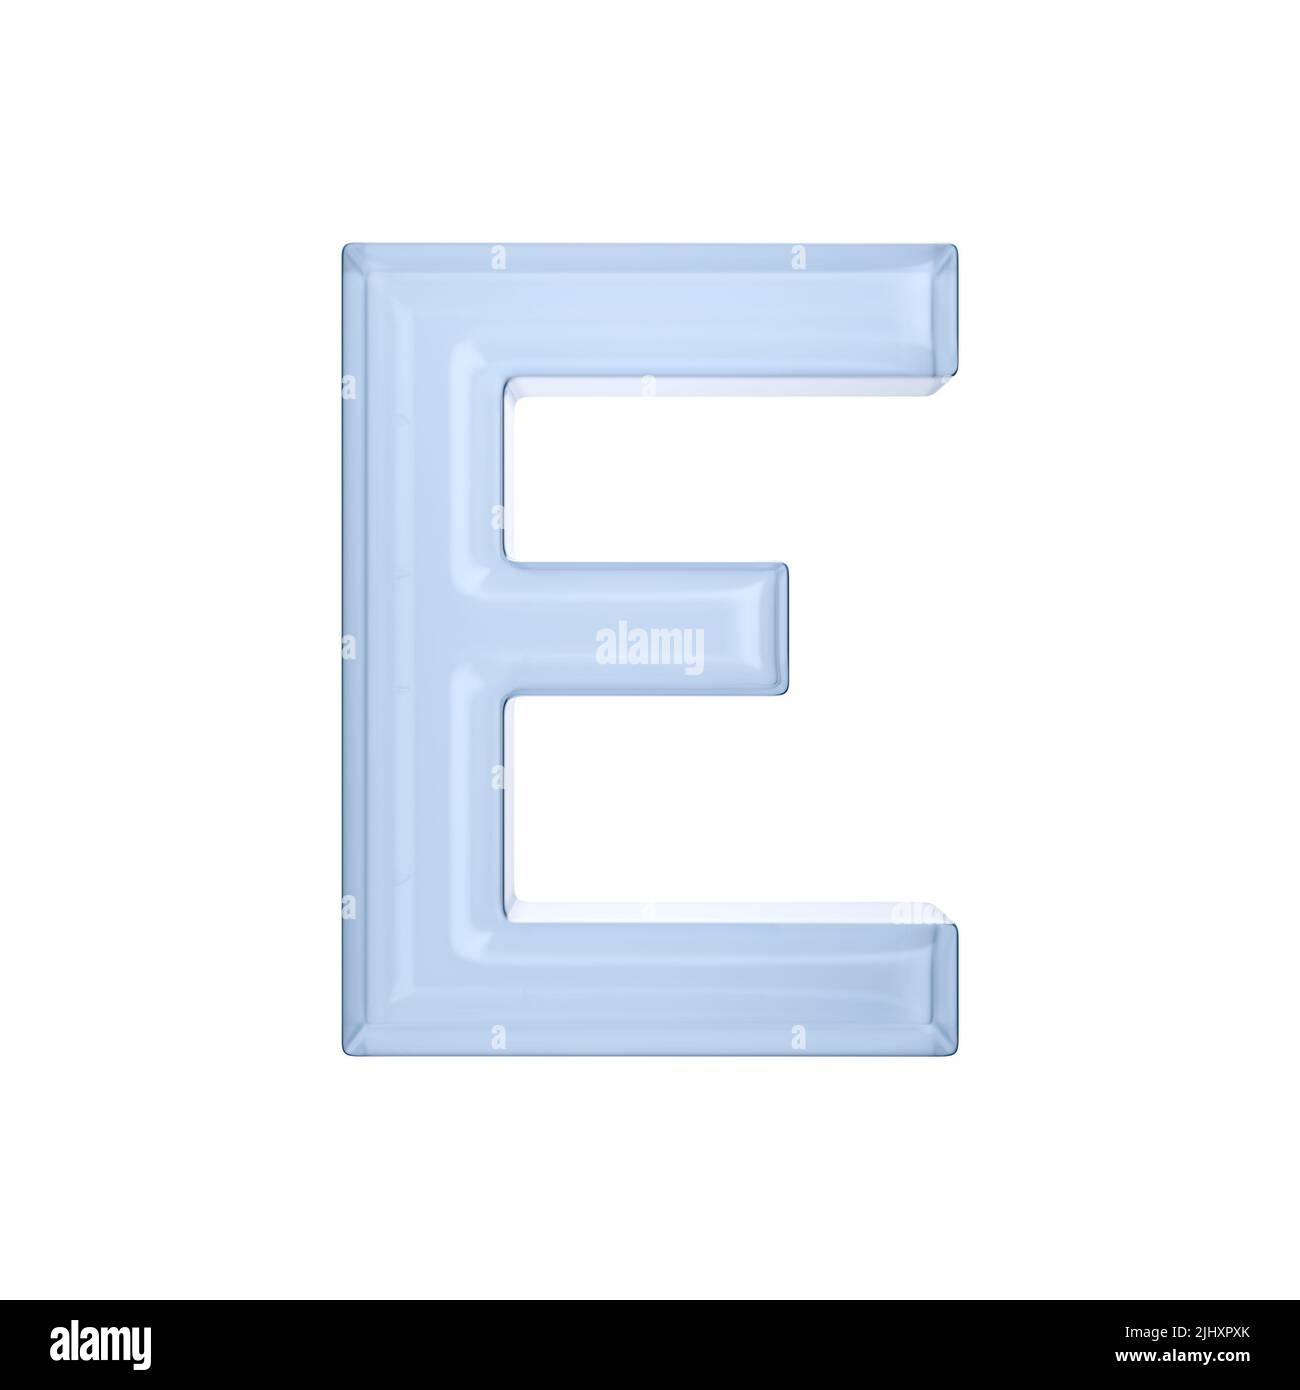 Character E on white background. Isolated 3D illustration Stock Photo